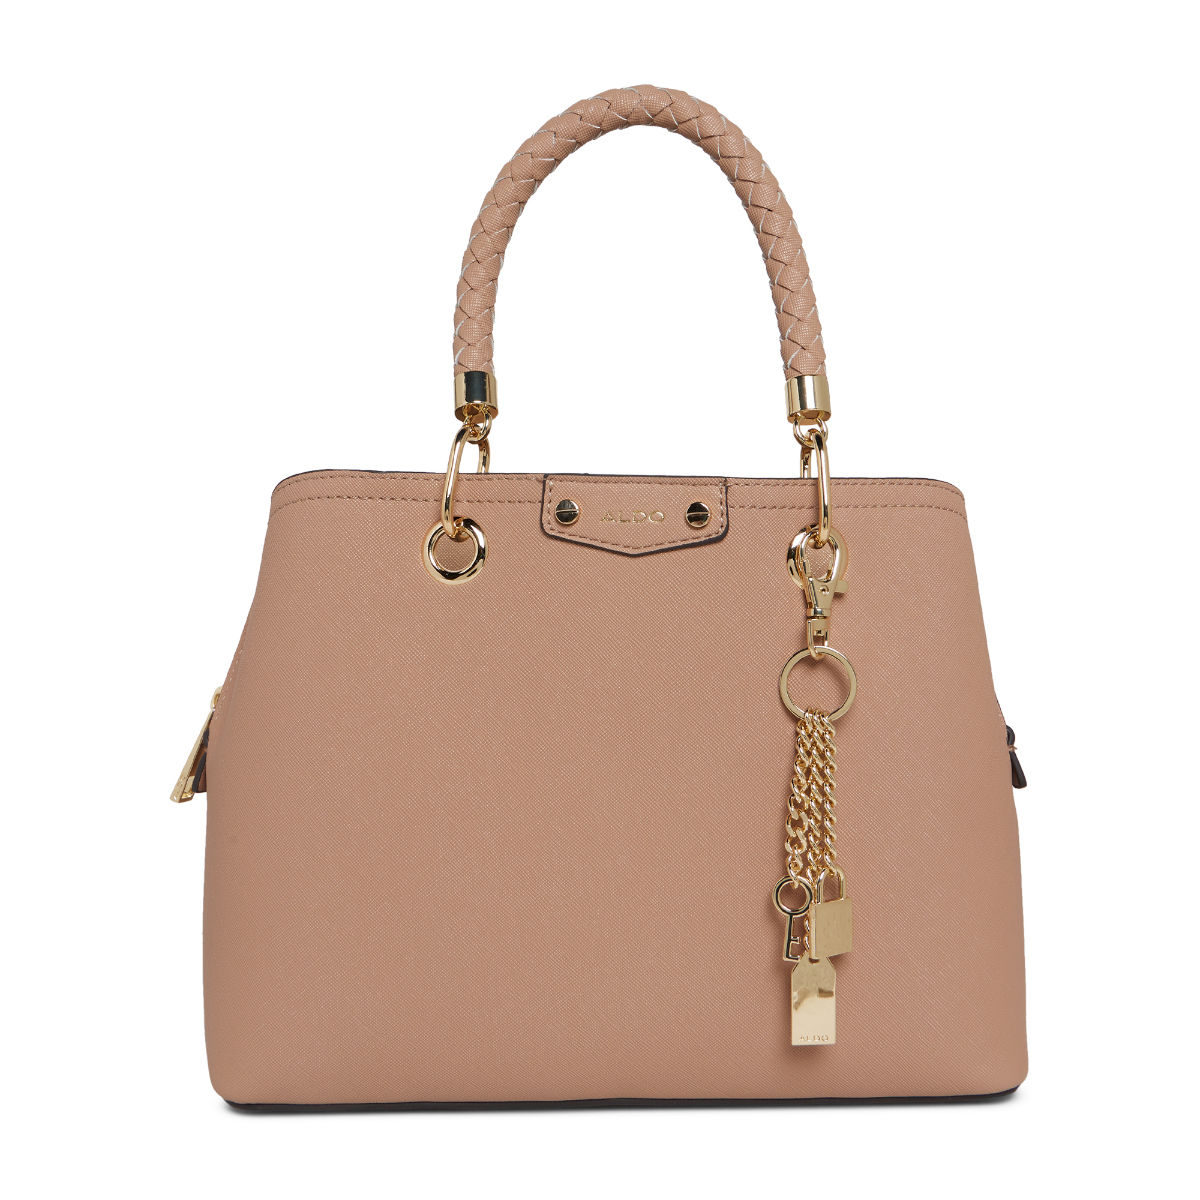 Aldo Pink Hand Bag - Aldo Pink Handbag Price Starting From Rs 5,759 | Find  Verified Sellers at Justdial